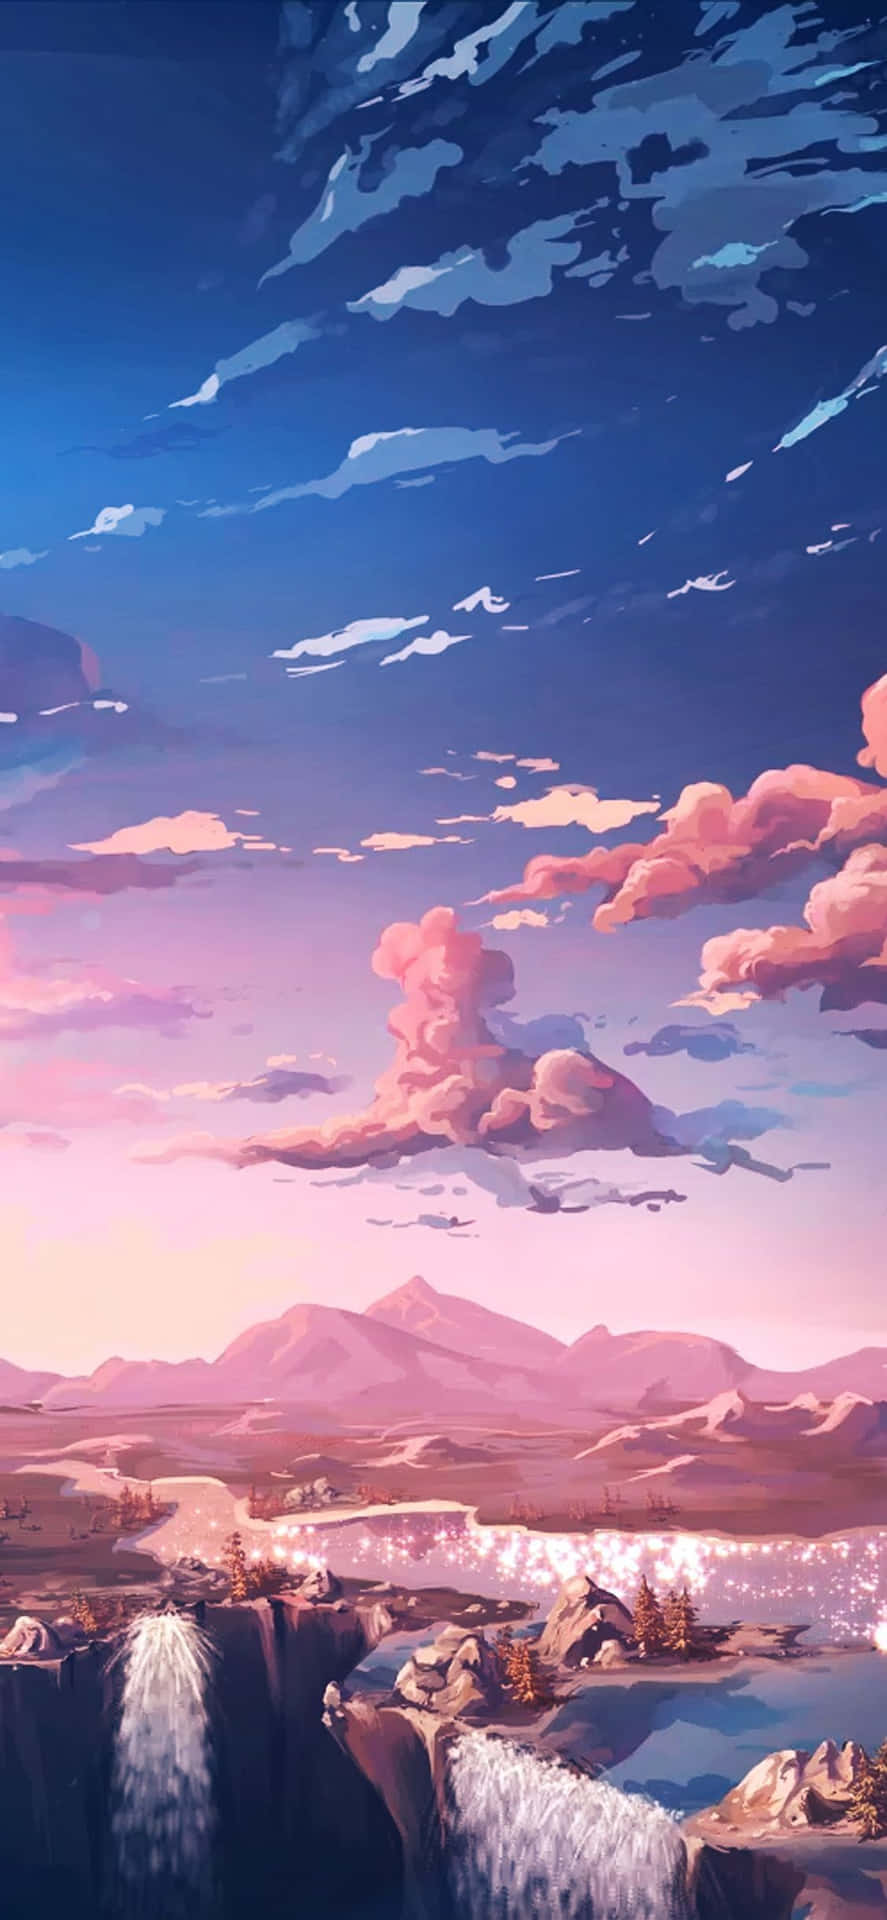 Aesthetic Sunset and Mountains